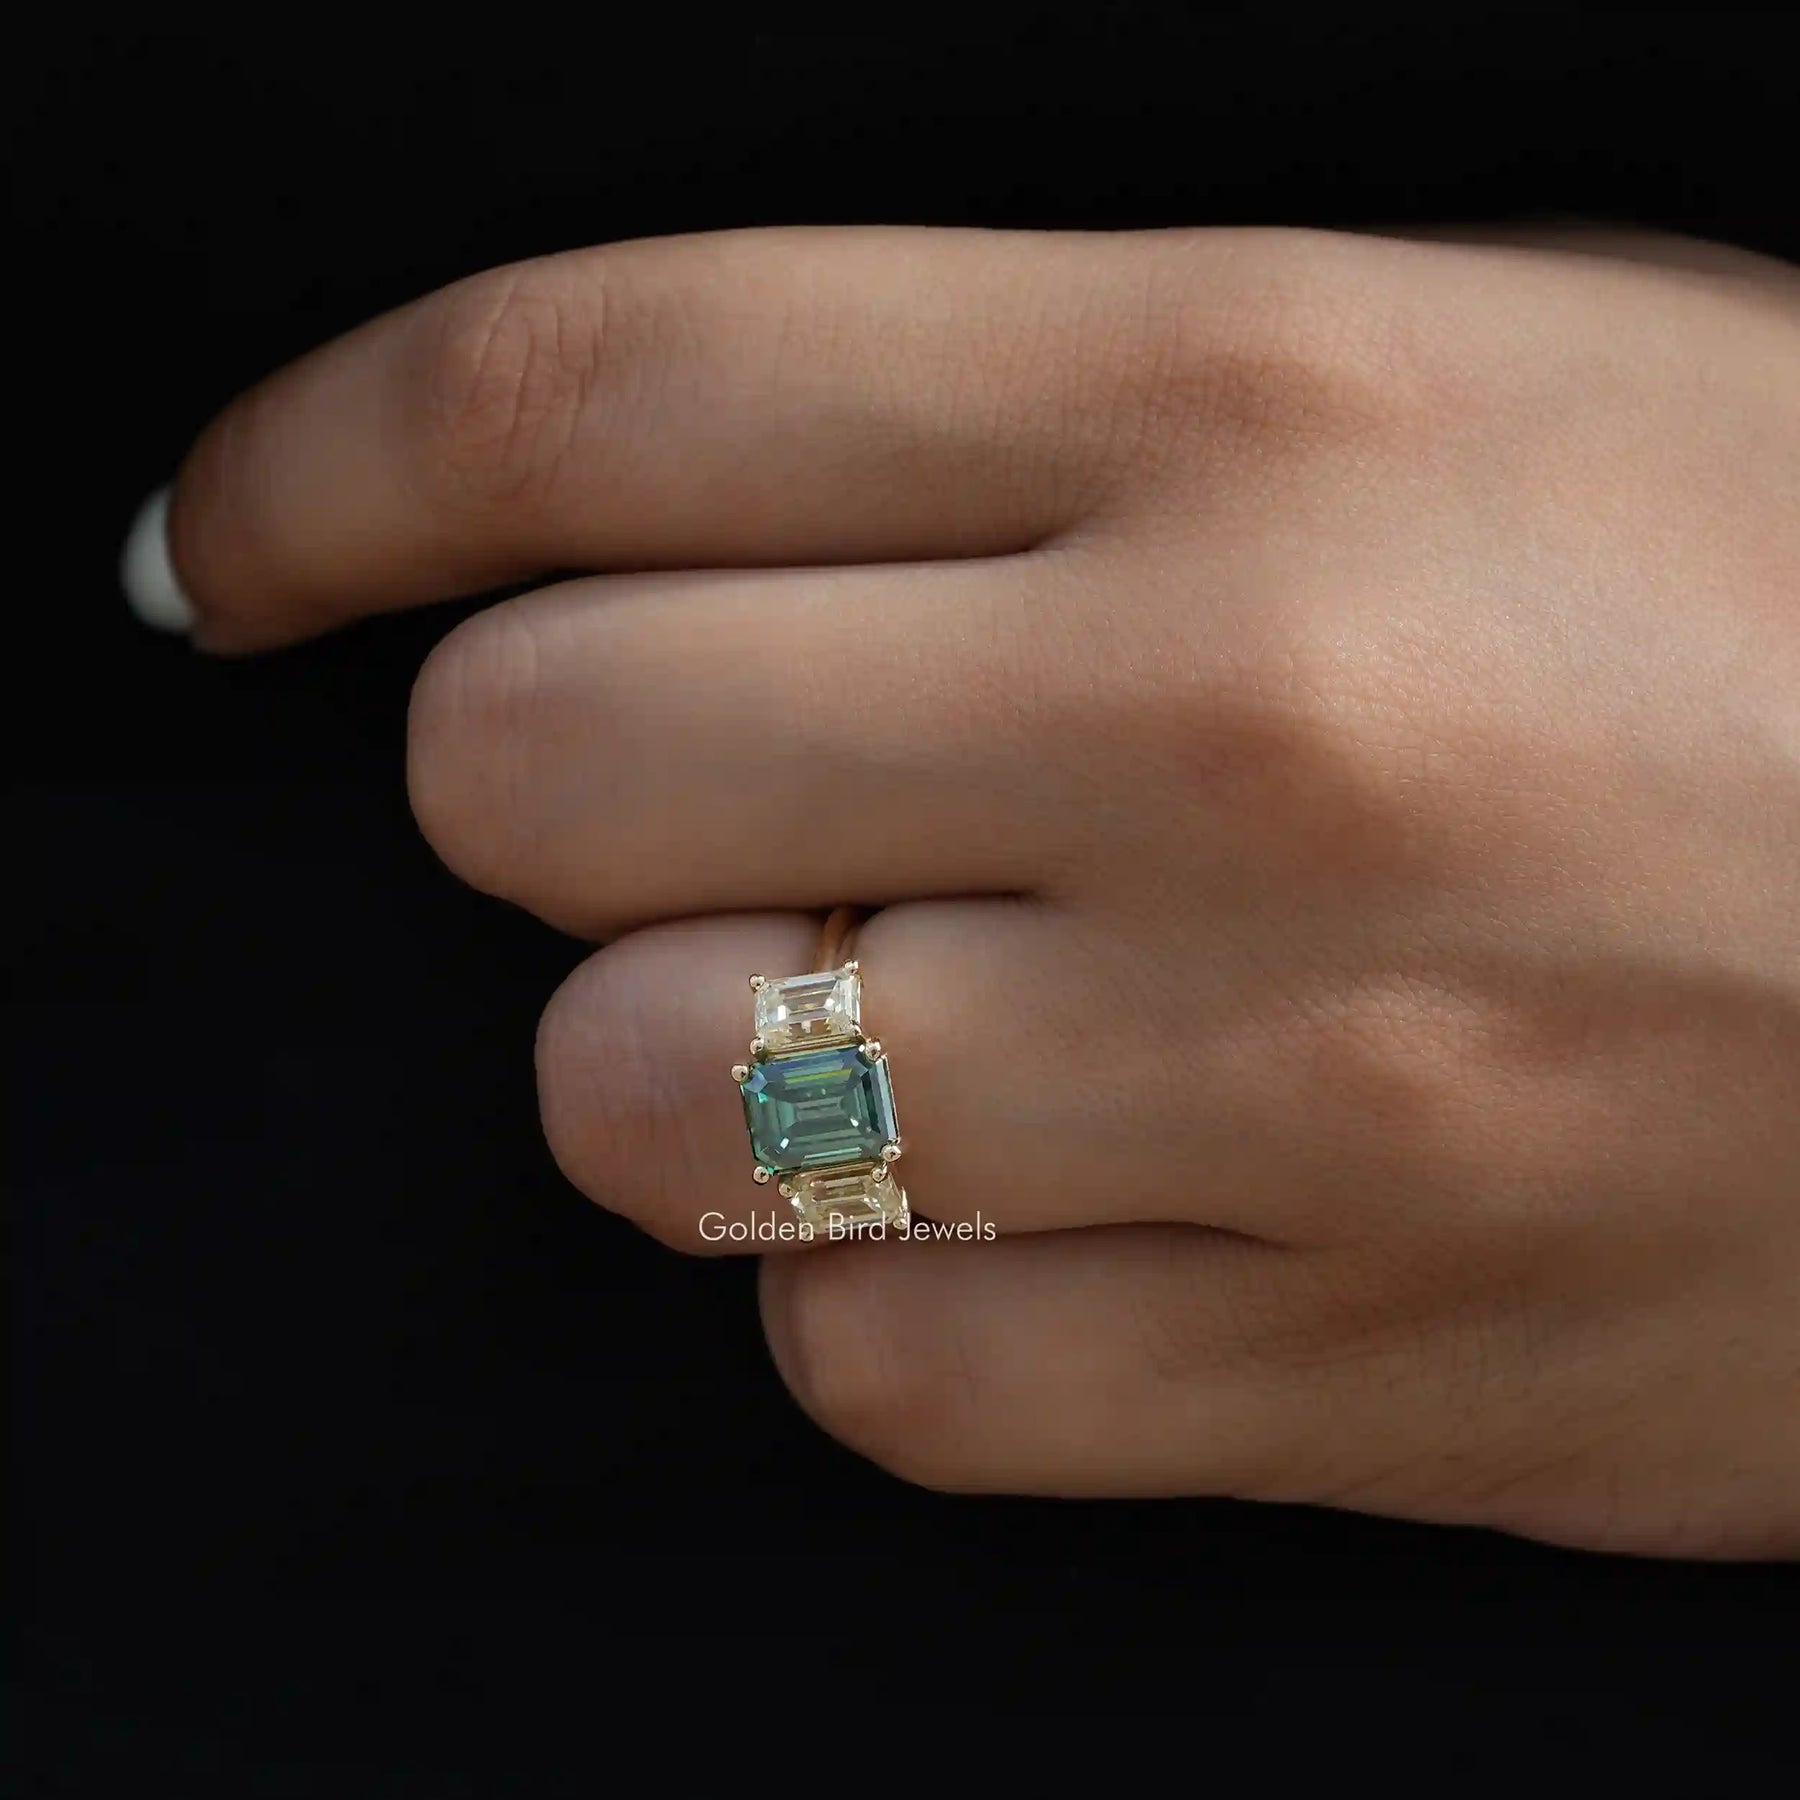 [In finger side view of emerald cut moissanite 3 stone ring]-[Golden Bird Jewels]